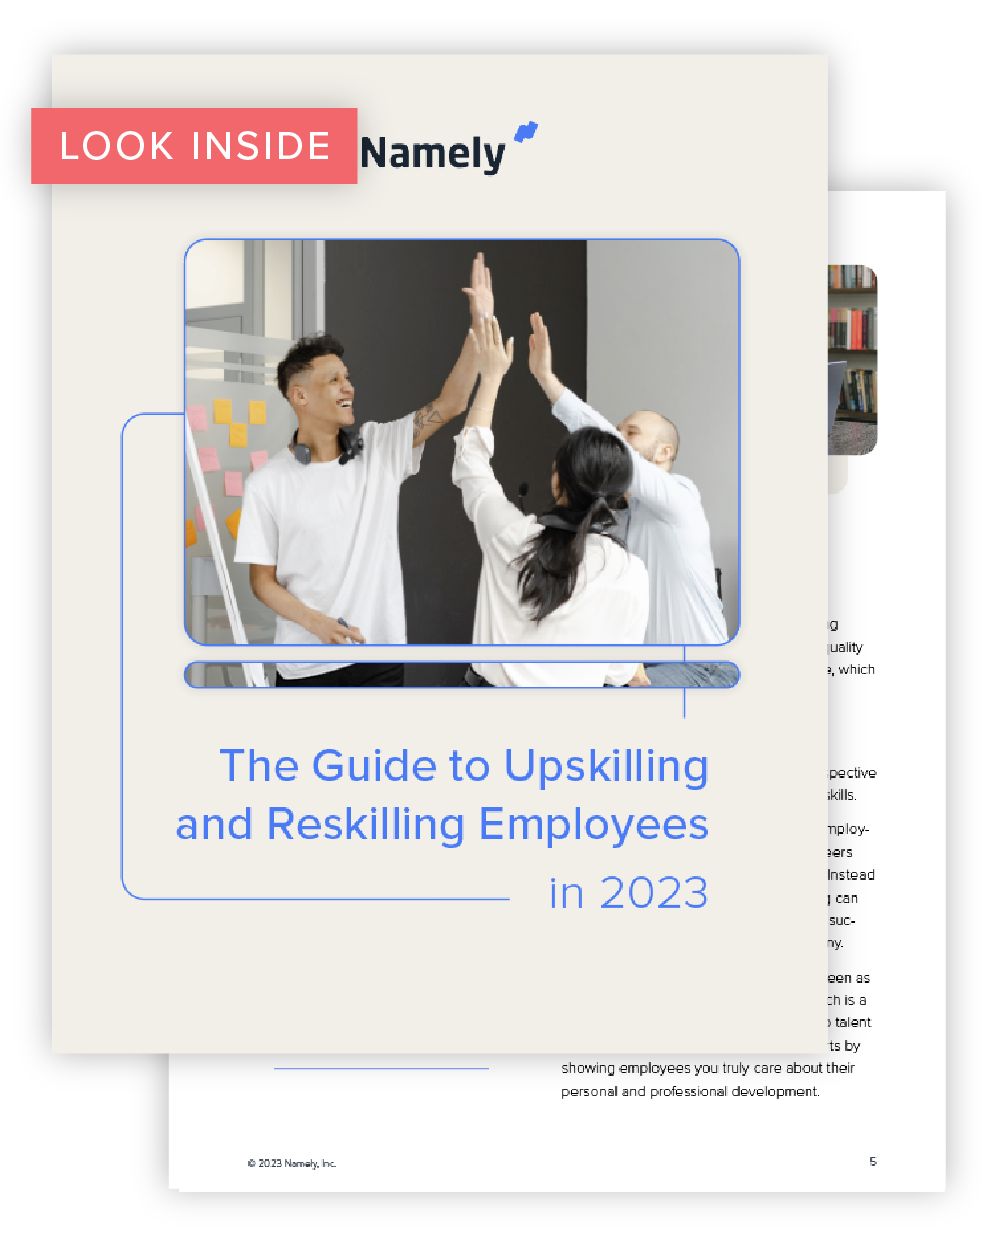 upskilling and reskilling employees in 2023